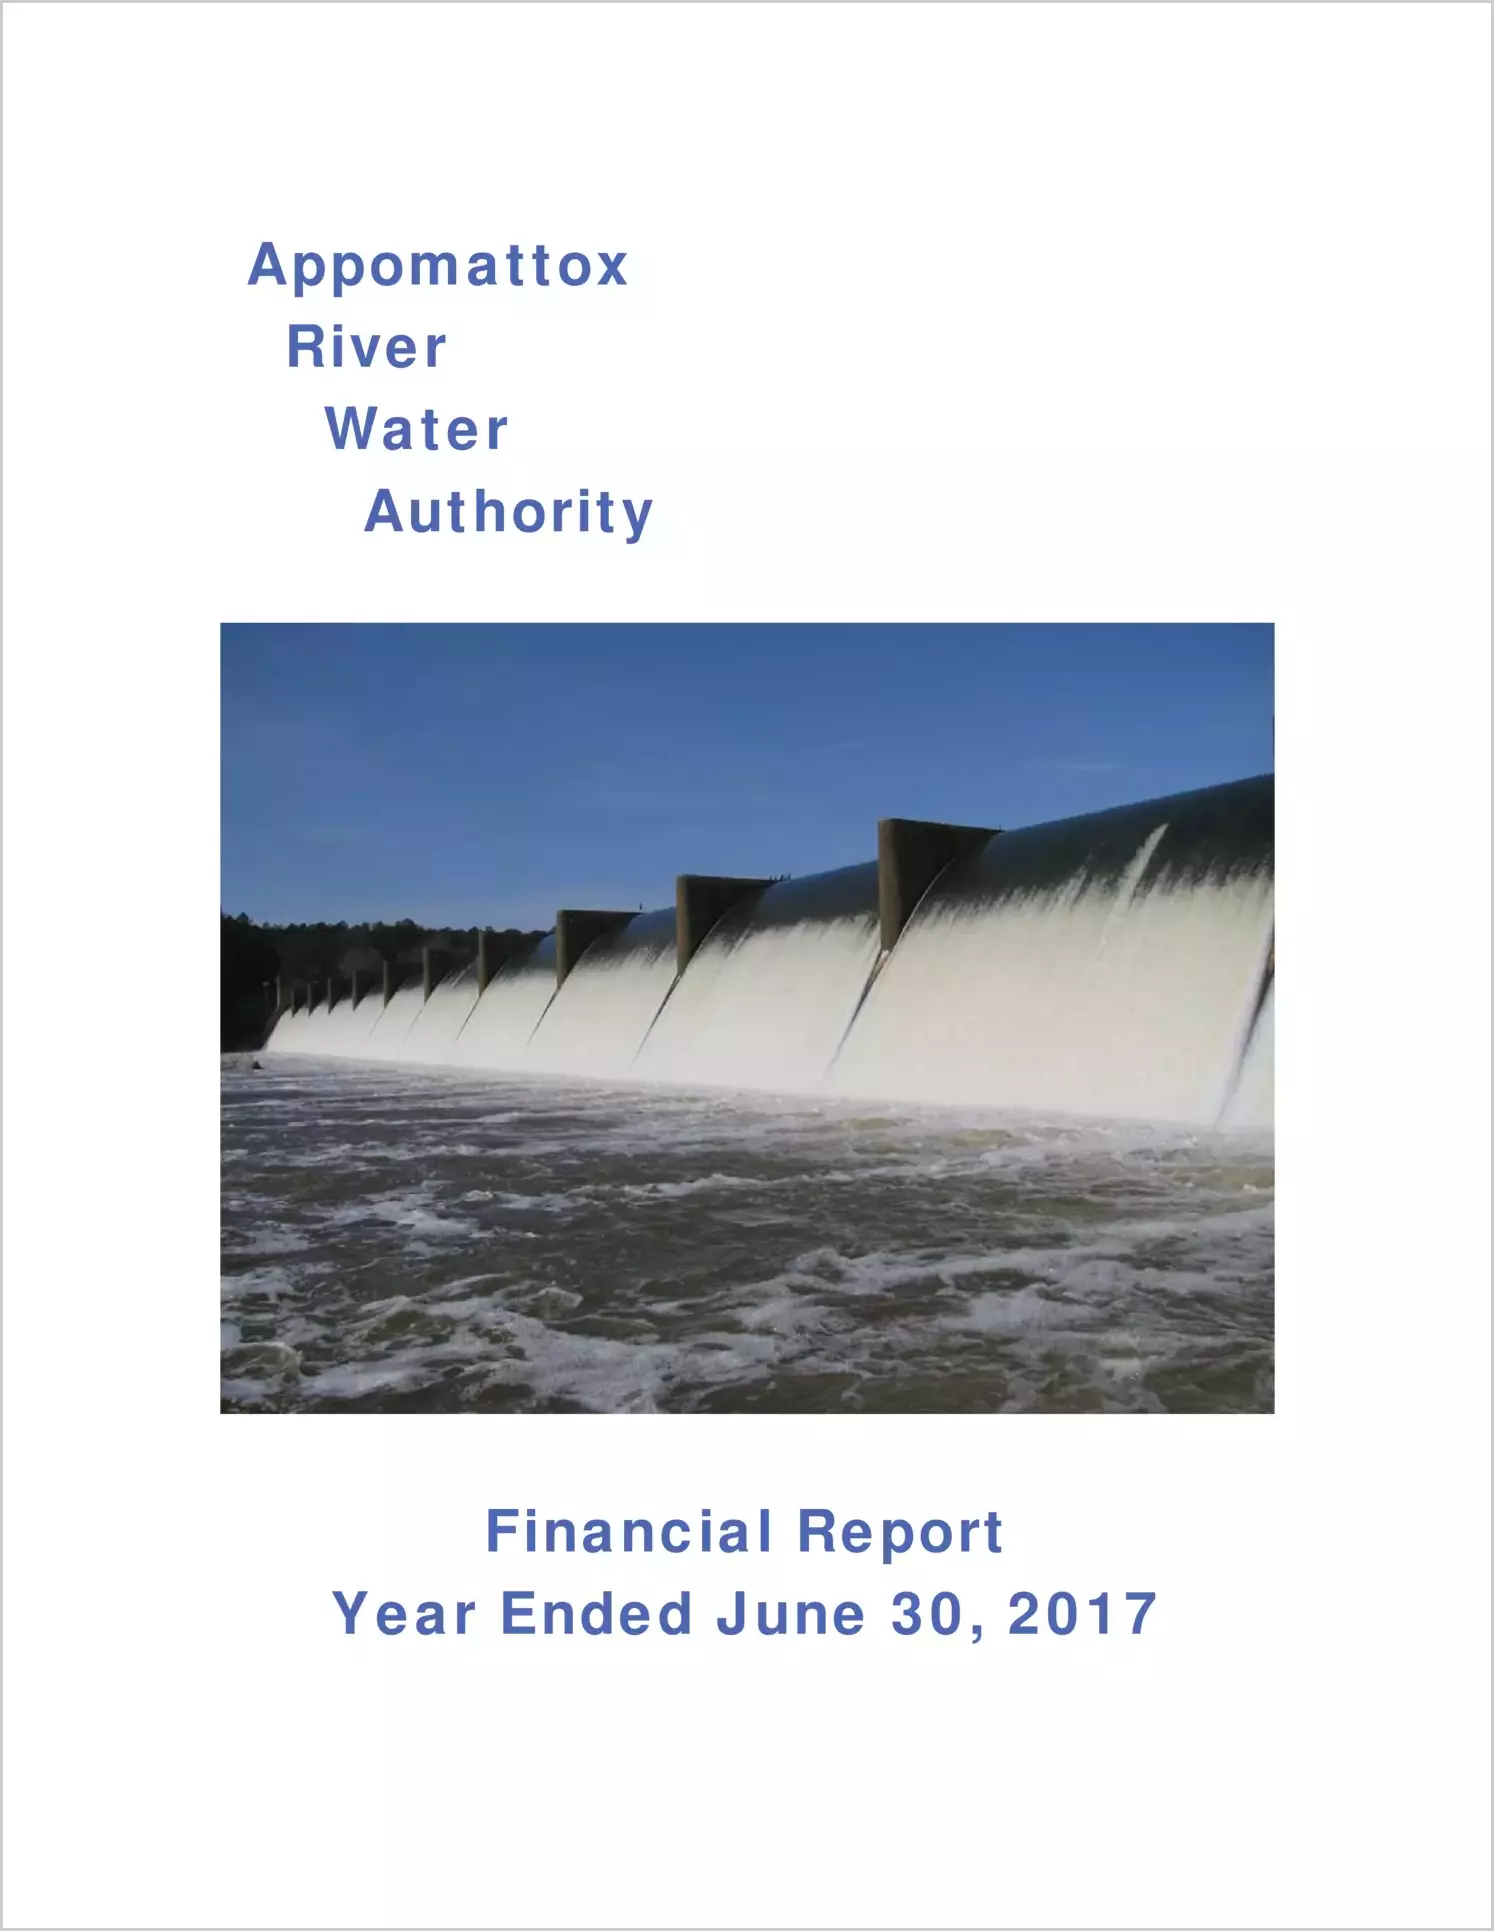 2017 ABC/Other Annual Financial Report  for Appomattox River Water Authority